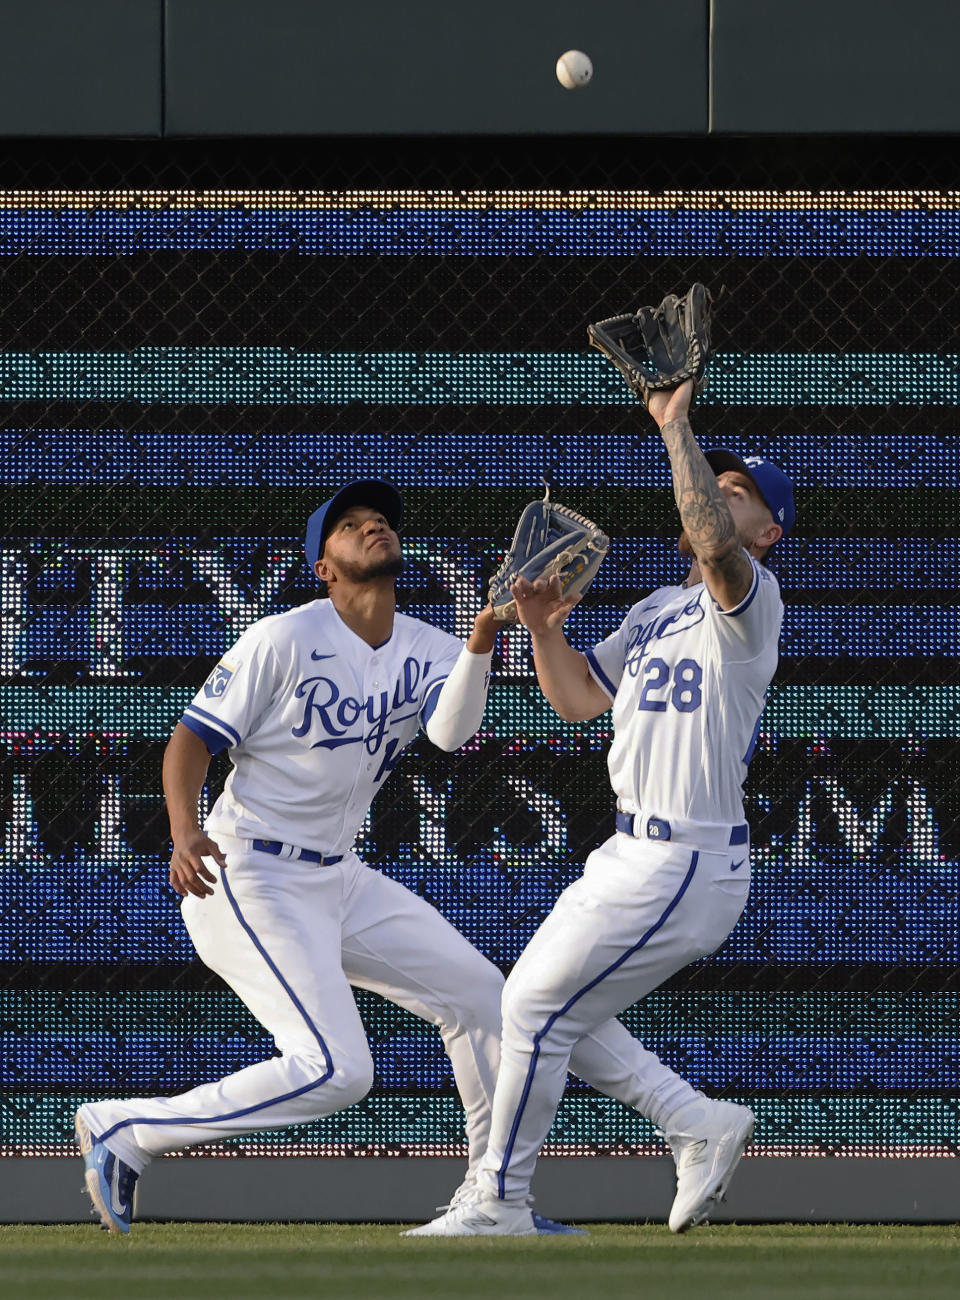 Kansas City Royals left fielder Edward Olivares (14) and center fielder Kyle Isbel (28) converge on a fly ball from Baltimore Orioles batter Ryan Mountcastle for an out during the third inning of a baseball game in Kansas City, Mo., Wednesday, May 3, 2023. (AP Photo/Colin E. Braley)